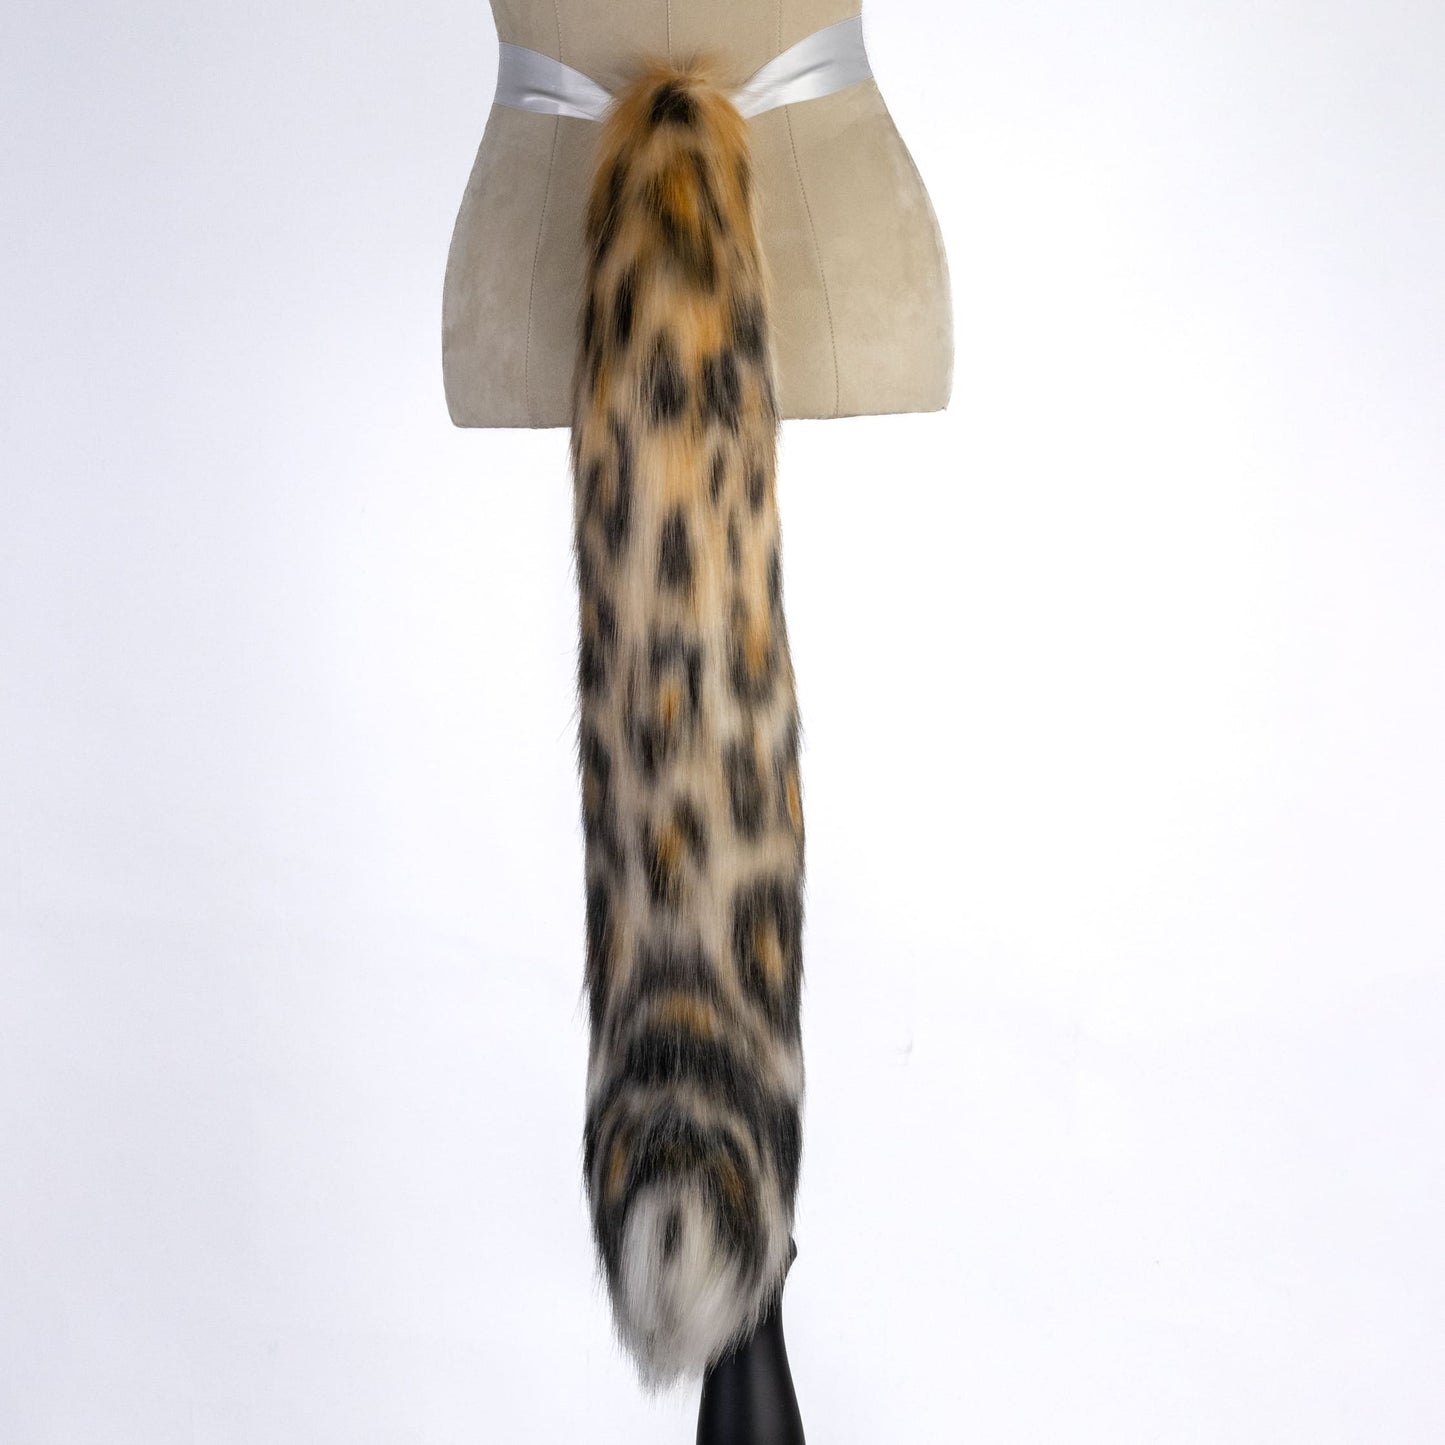 Leopard Ears and Tail Set